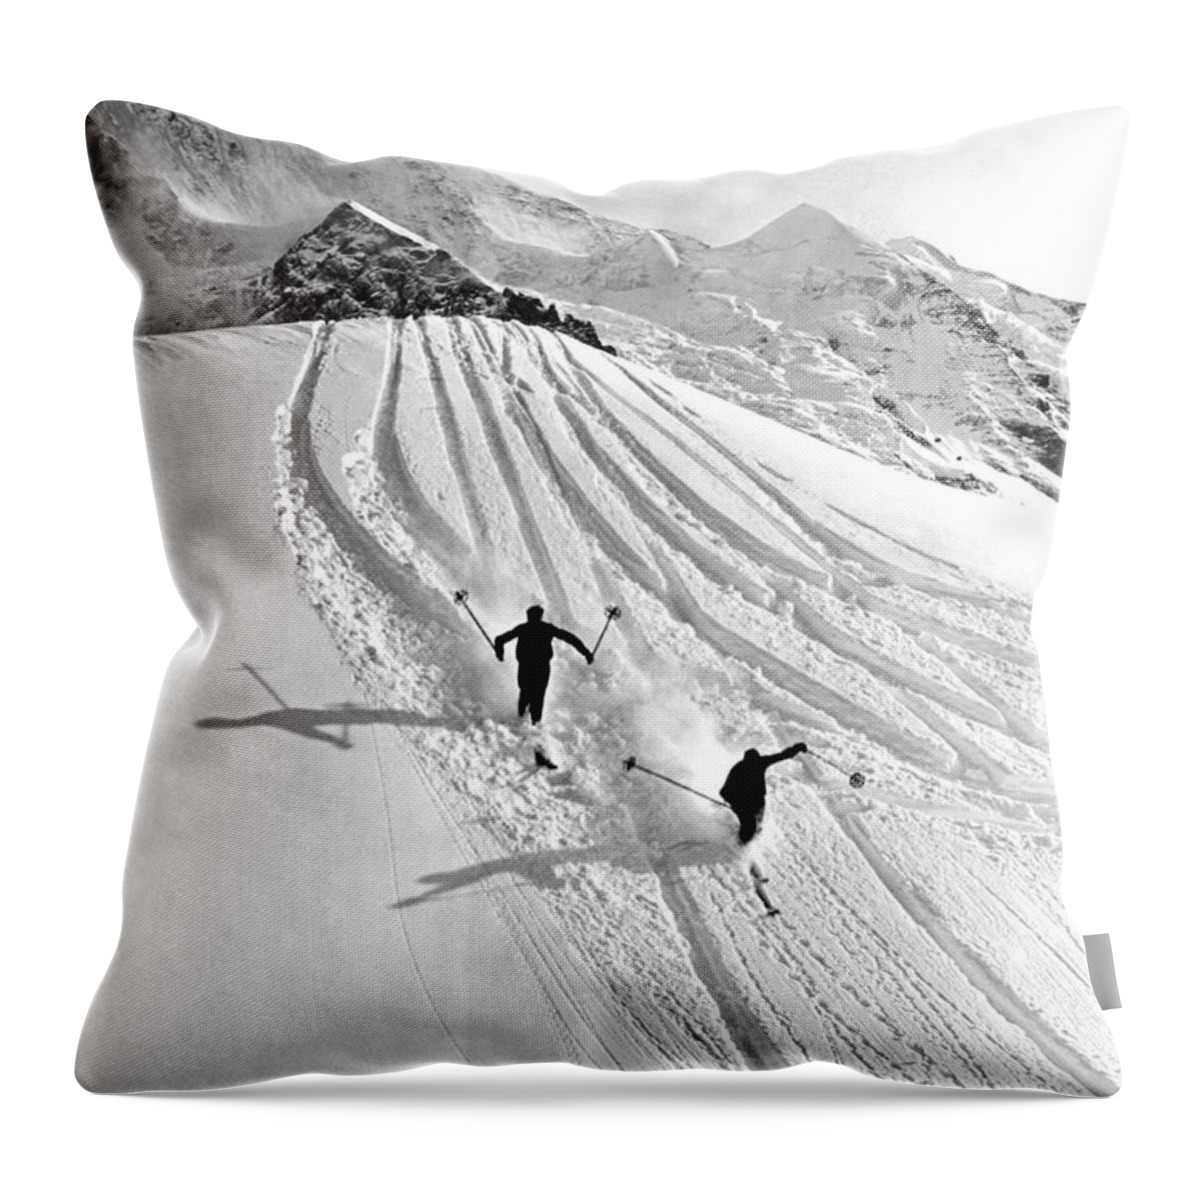 1937 Throw Pillow featuring the photograph Downhill Skiing In Powder by Underwood Archives